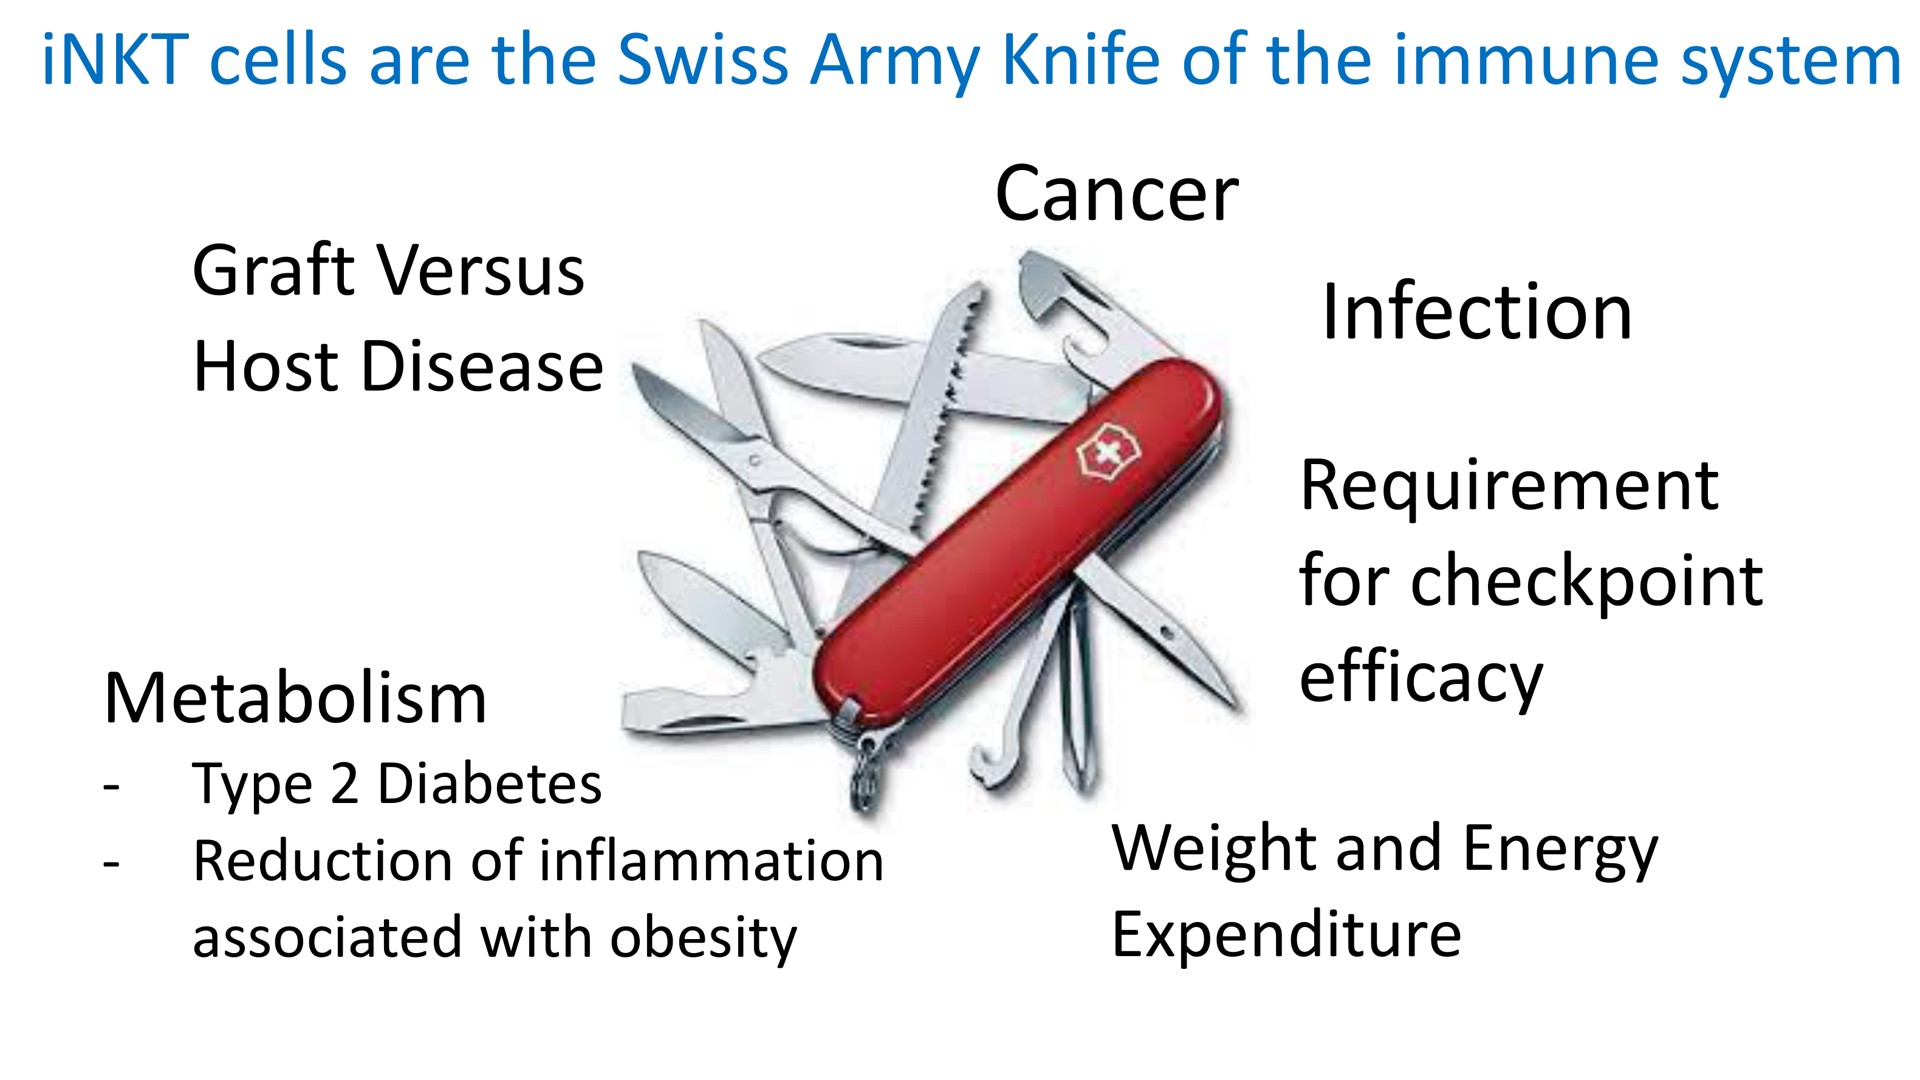 cells are the swiss army knife of the immune system graft versus host disease metabolism type diabetes reduction of inflammation associated with obesity cancer infection requirement for efficacy weight and energy expenditure a | Mink Therapeutics